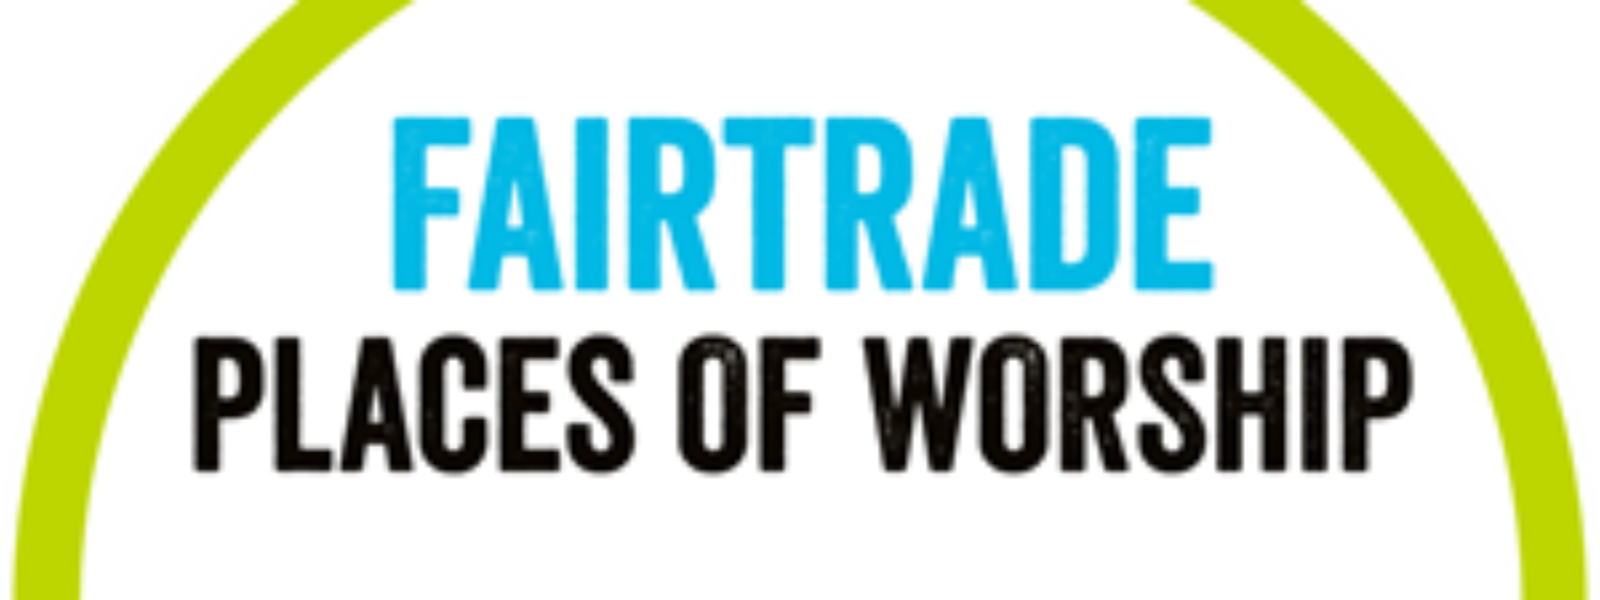 Fairtrade places of worship sign